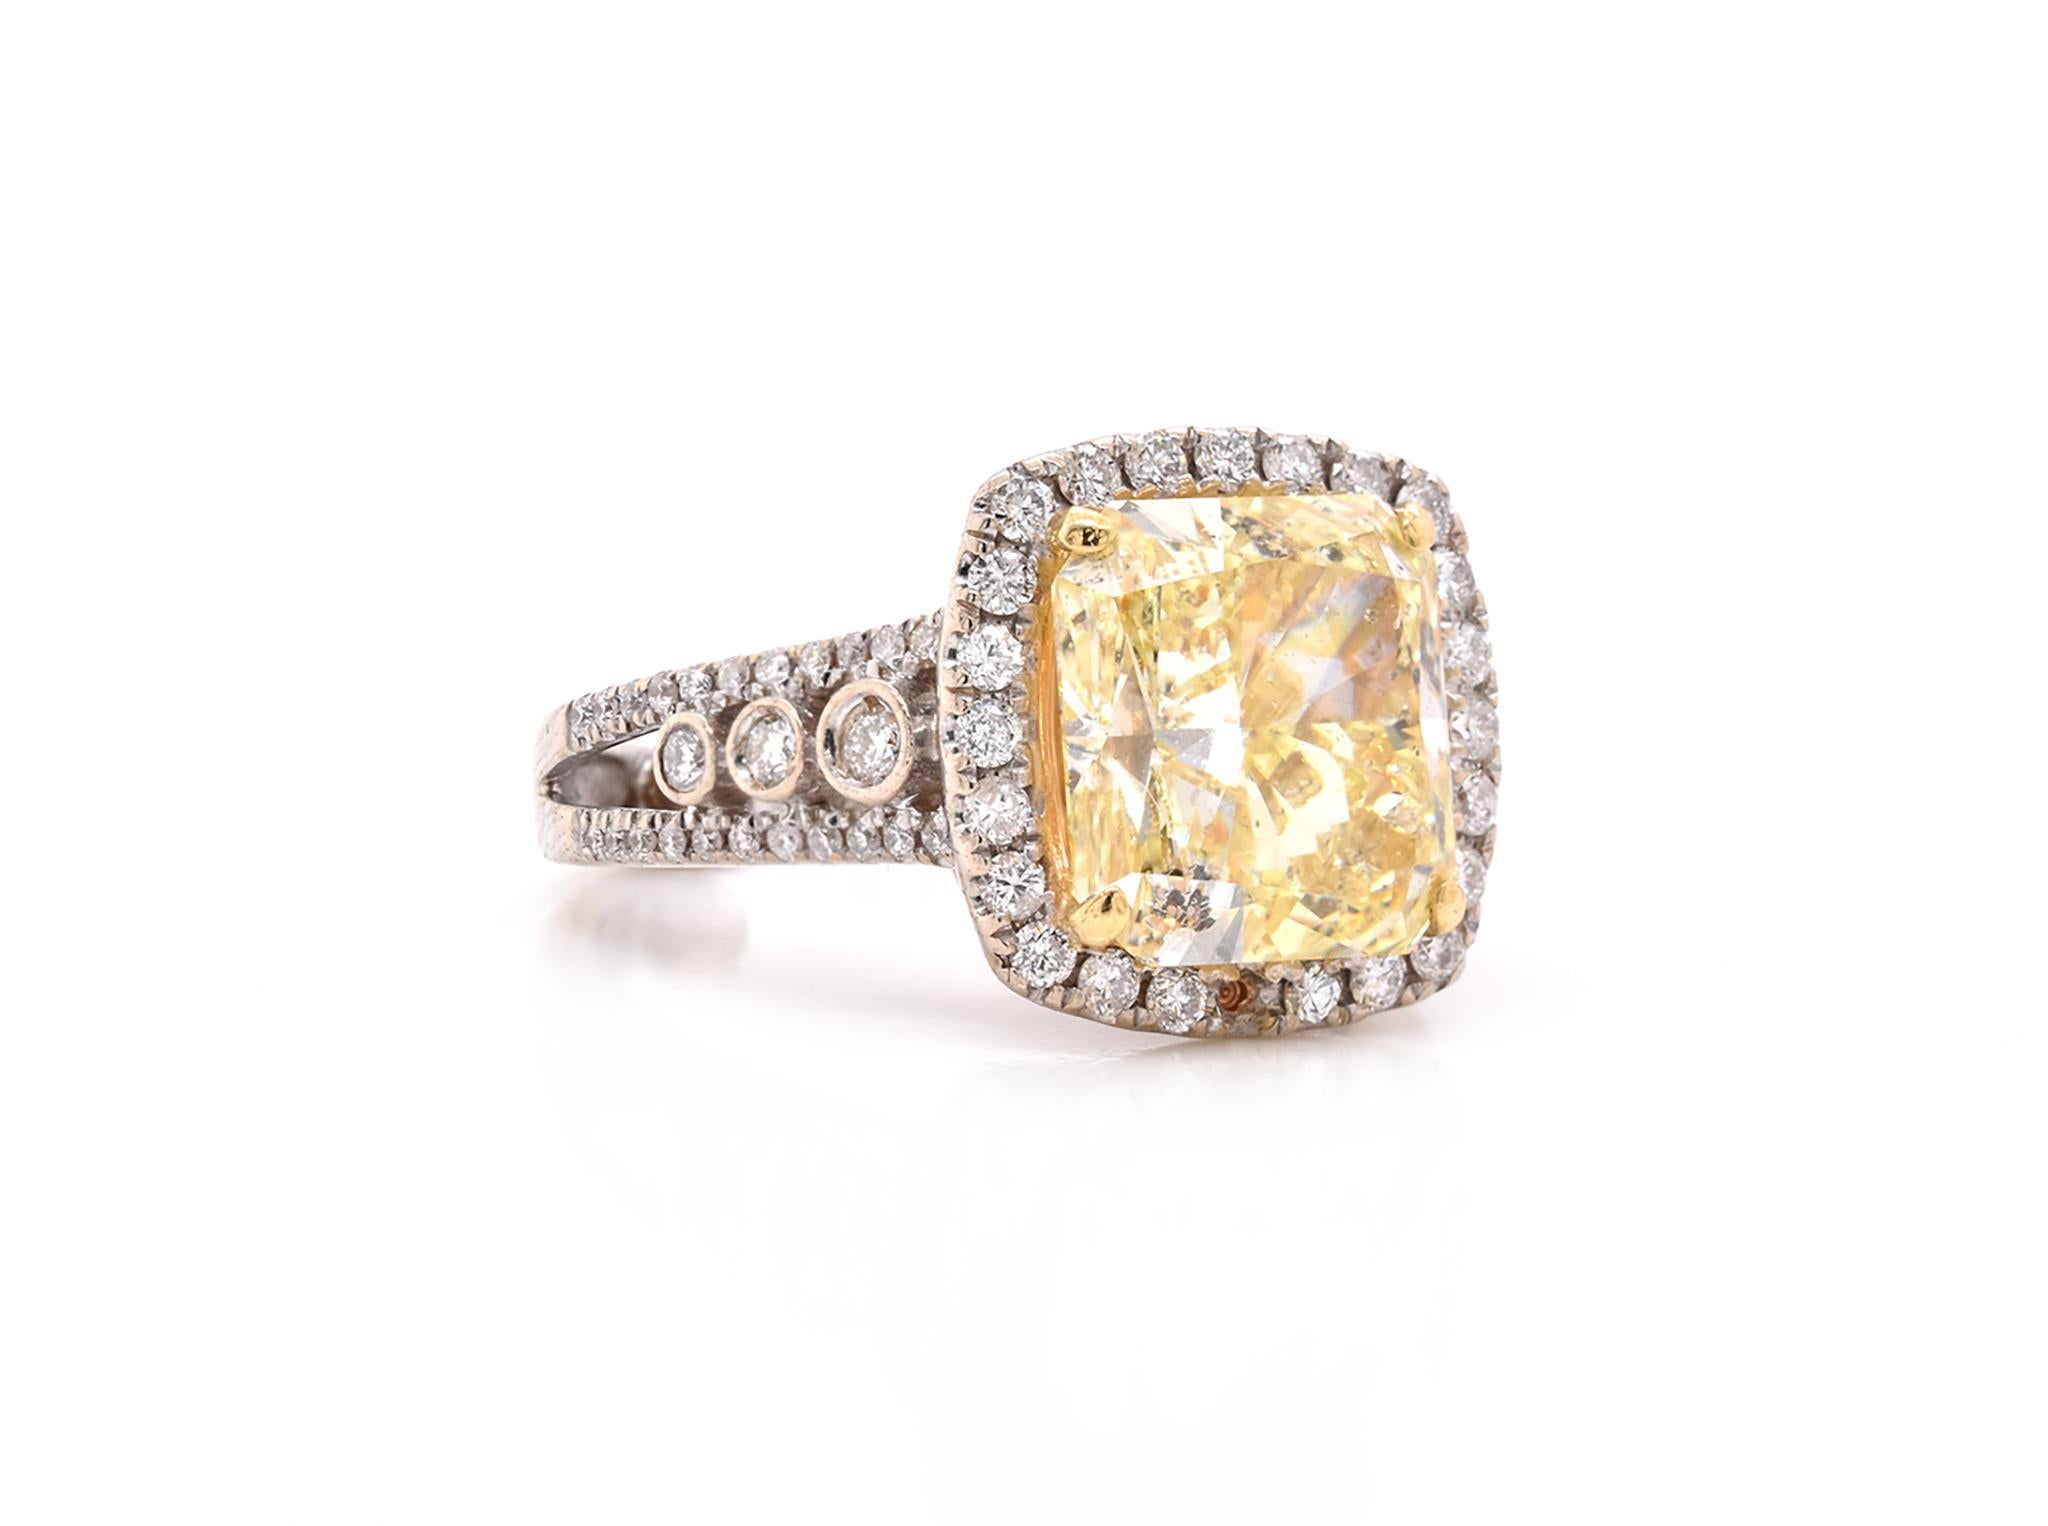 Material: 14K white gold
Center Diamond: 1 cushion cut = 5.04ct
Color: fancy light yellow
Clarity: SI2
Certification: GIA 2125898489
Diamonds: 76 round cut = .75cttw
Color: G
Clarity: VS
Ring Size: 4 (please allow up to 2 additional business days